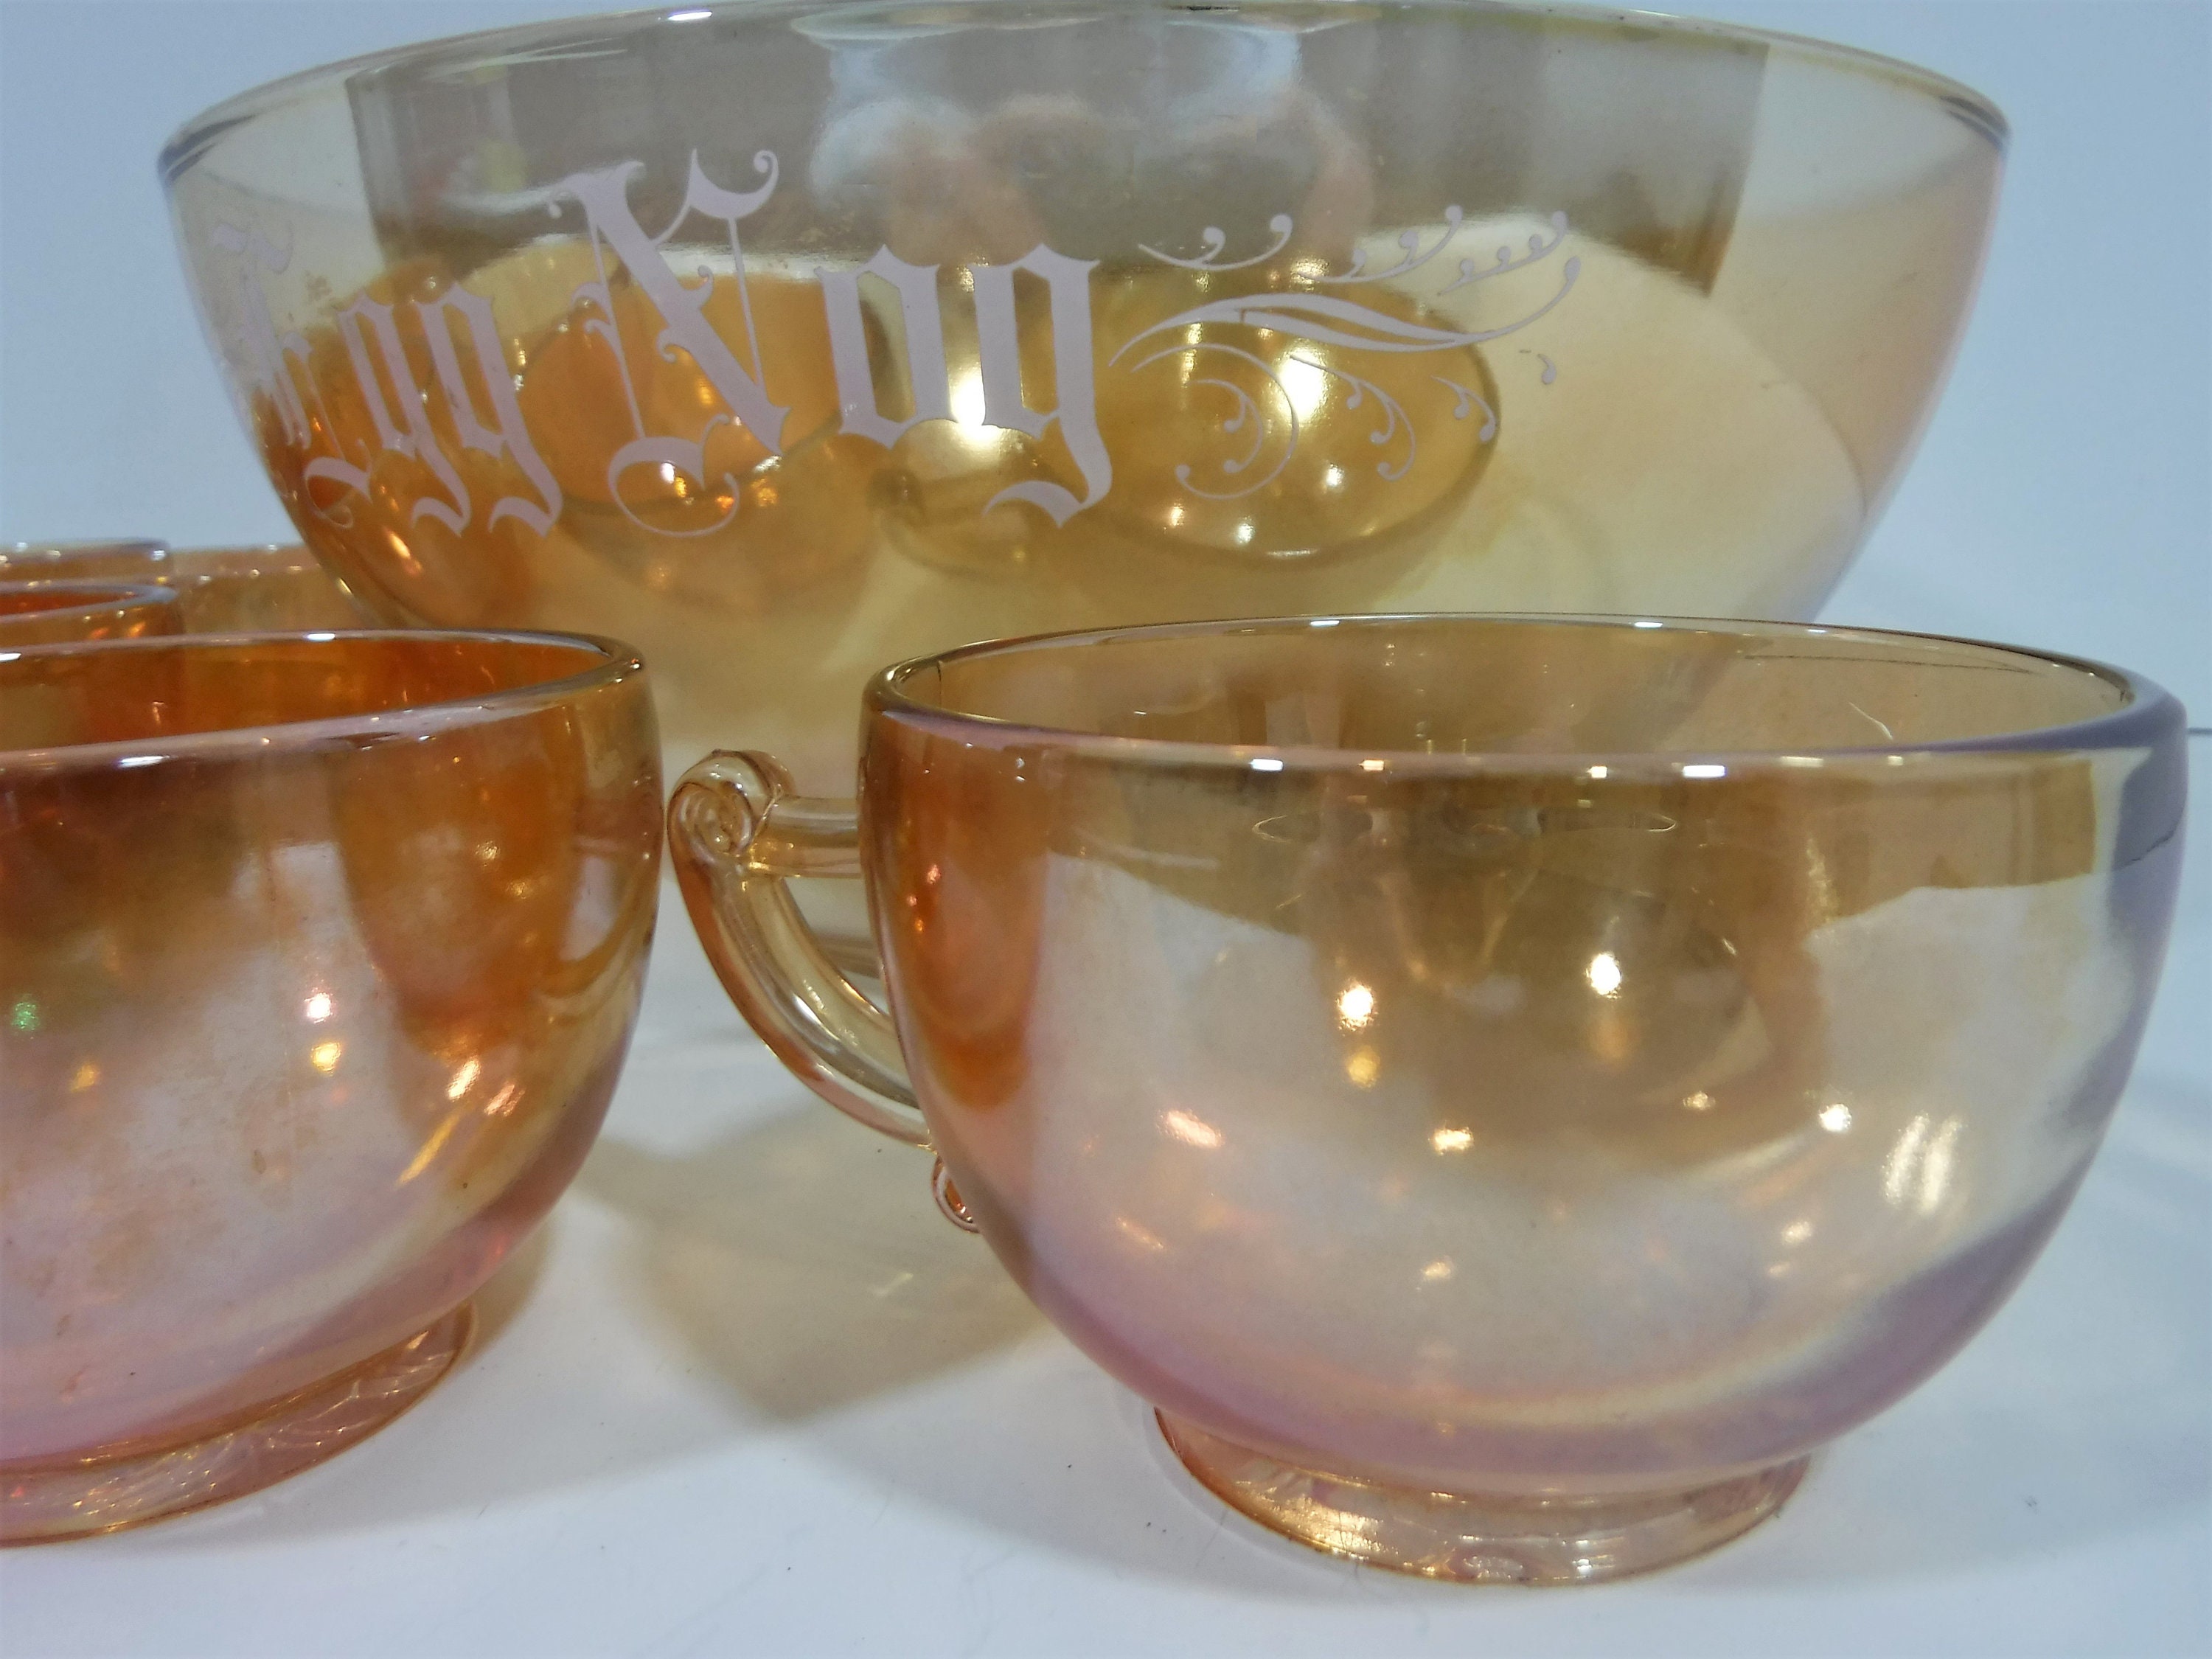 Peach Flower Can Glass Cup – Ngenuity Design Co.